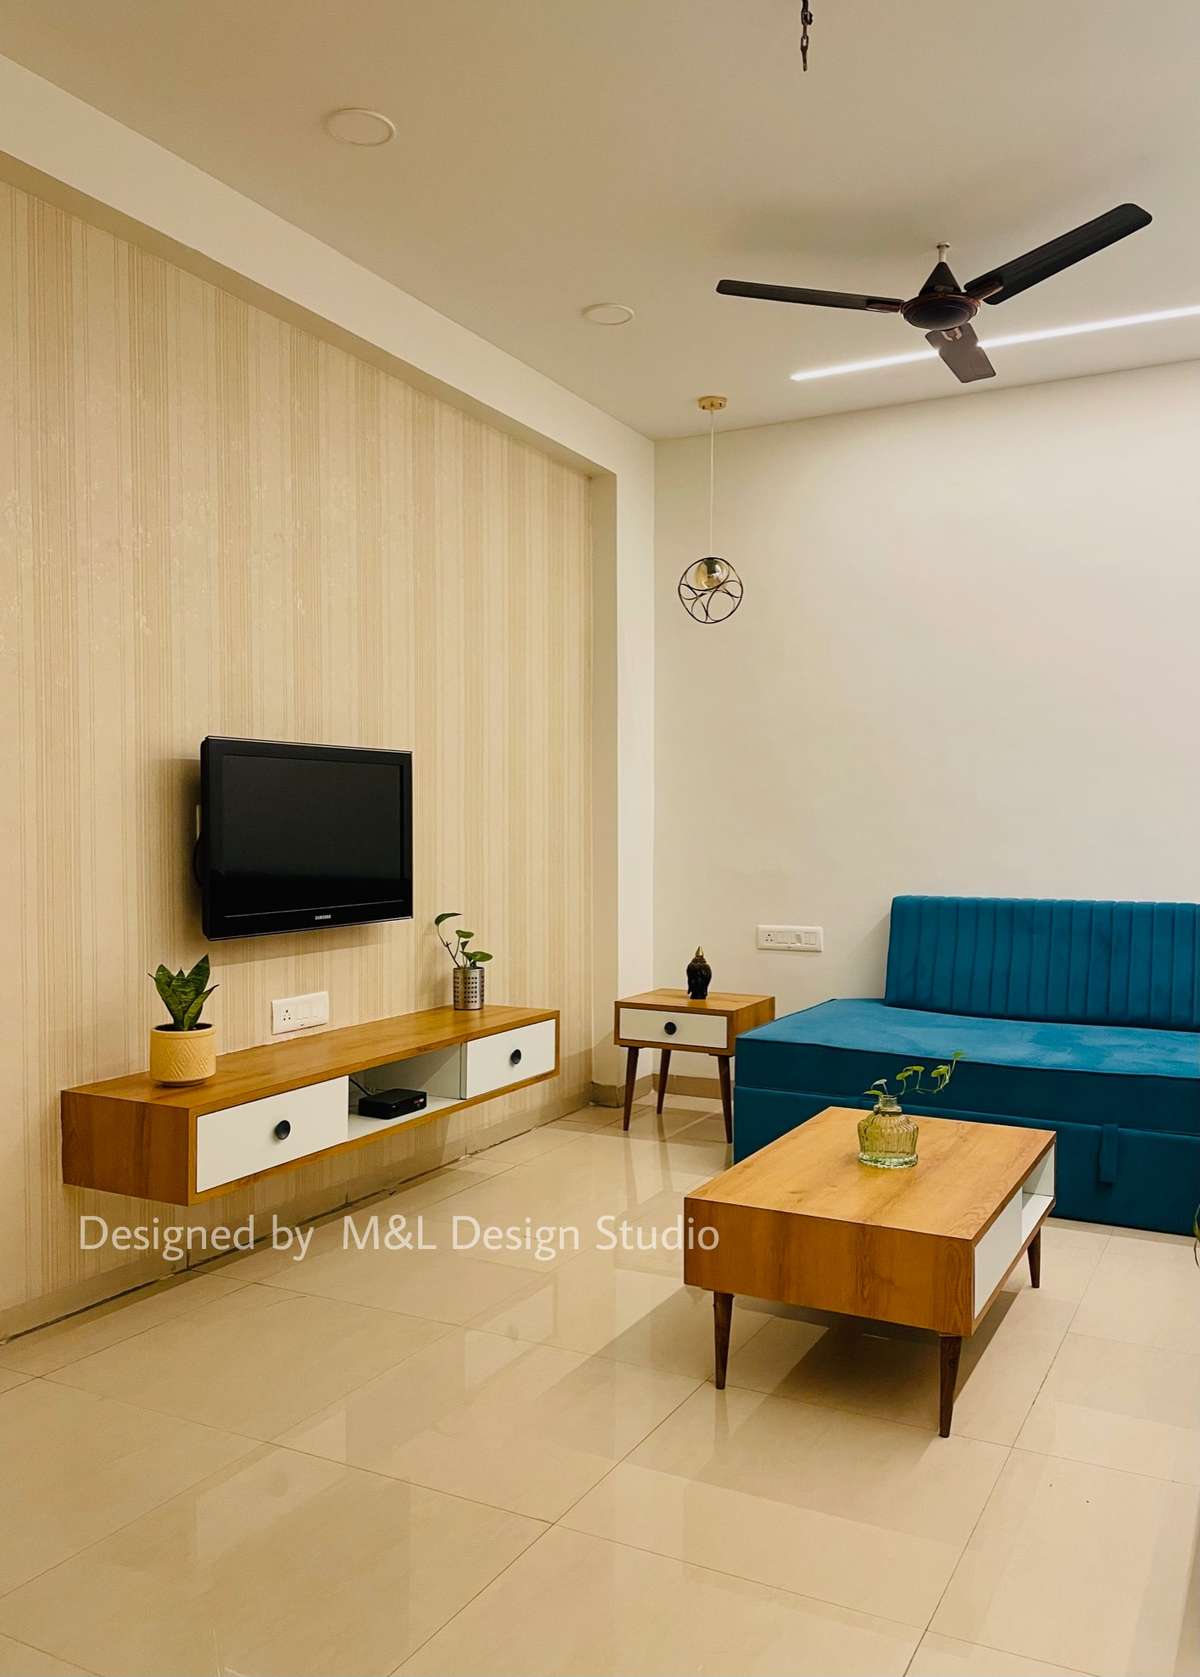 Recent Minimalist Living space Design by M&L Design Studio.
at South tukoganj Indore
Dm for Any inquiry and affordable home interior solution.
.
.
.
 #LivingroomDesigns #livingspace #LivingRoomSofa #LivingRoomWallPaper #drawingroom #HomeDecor #homeinteriordesign #homedecoration #indoreinterior
 #indorehouse